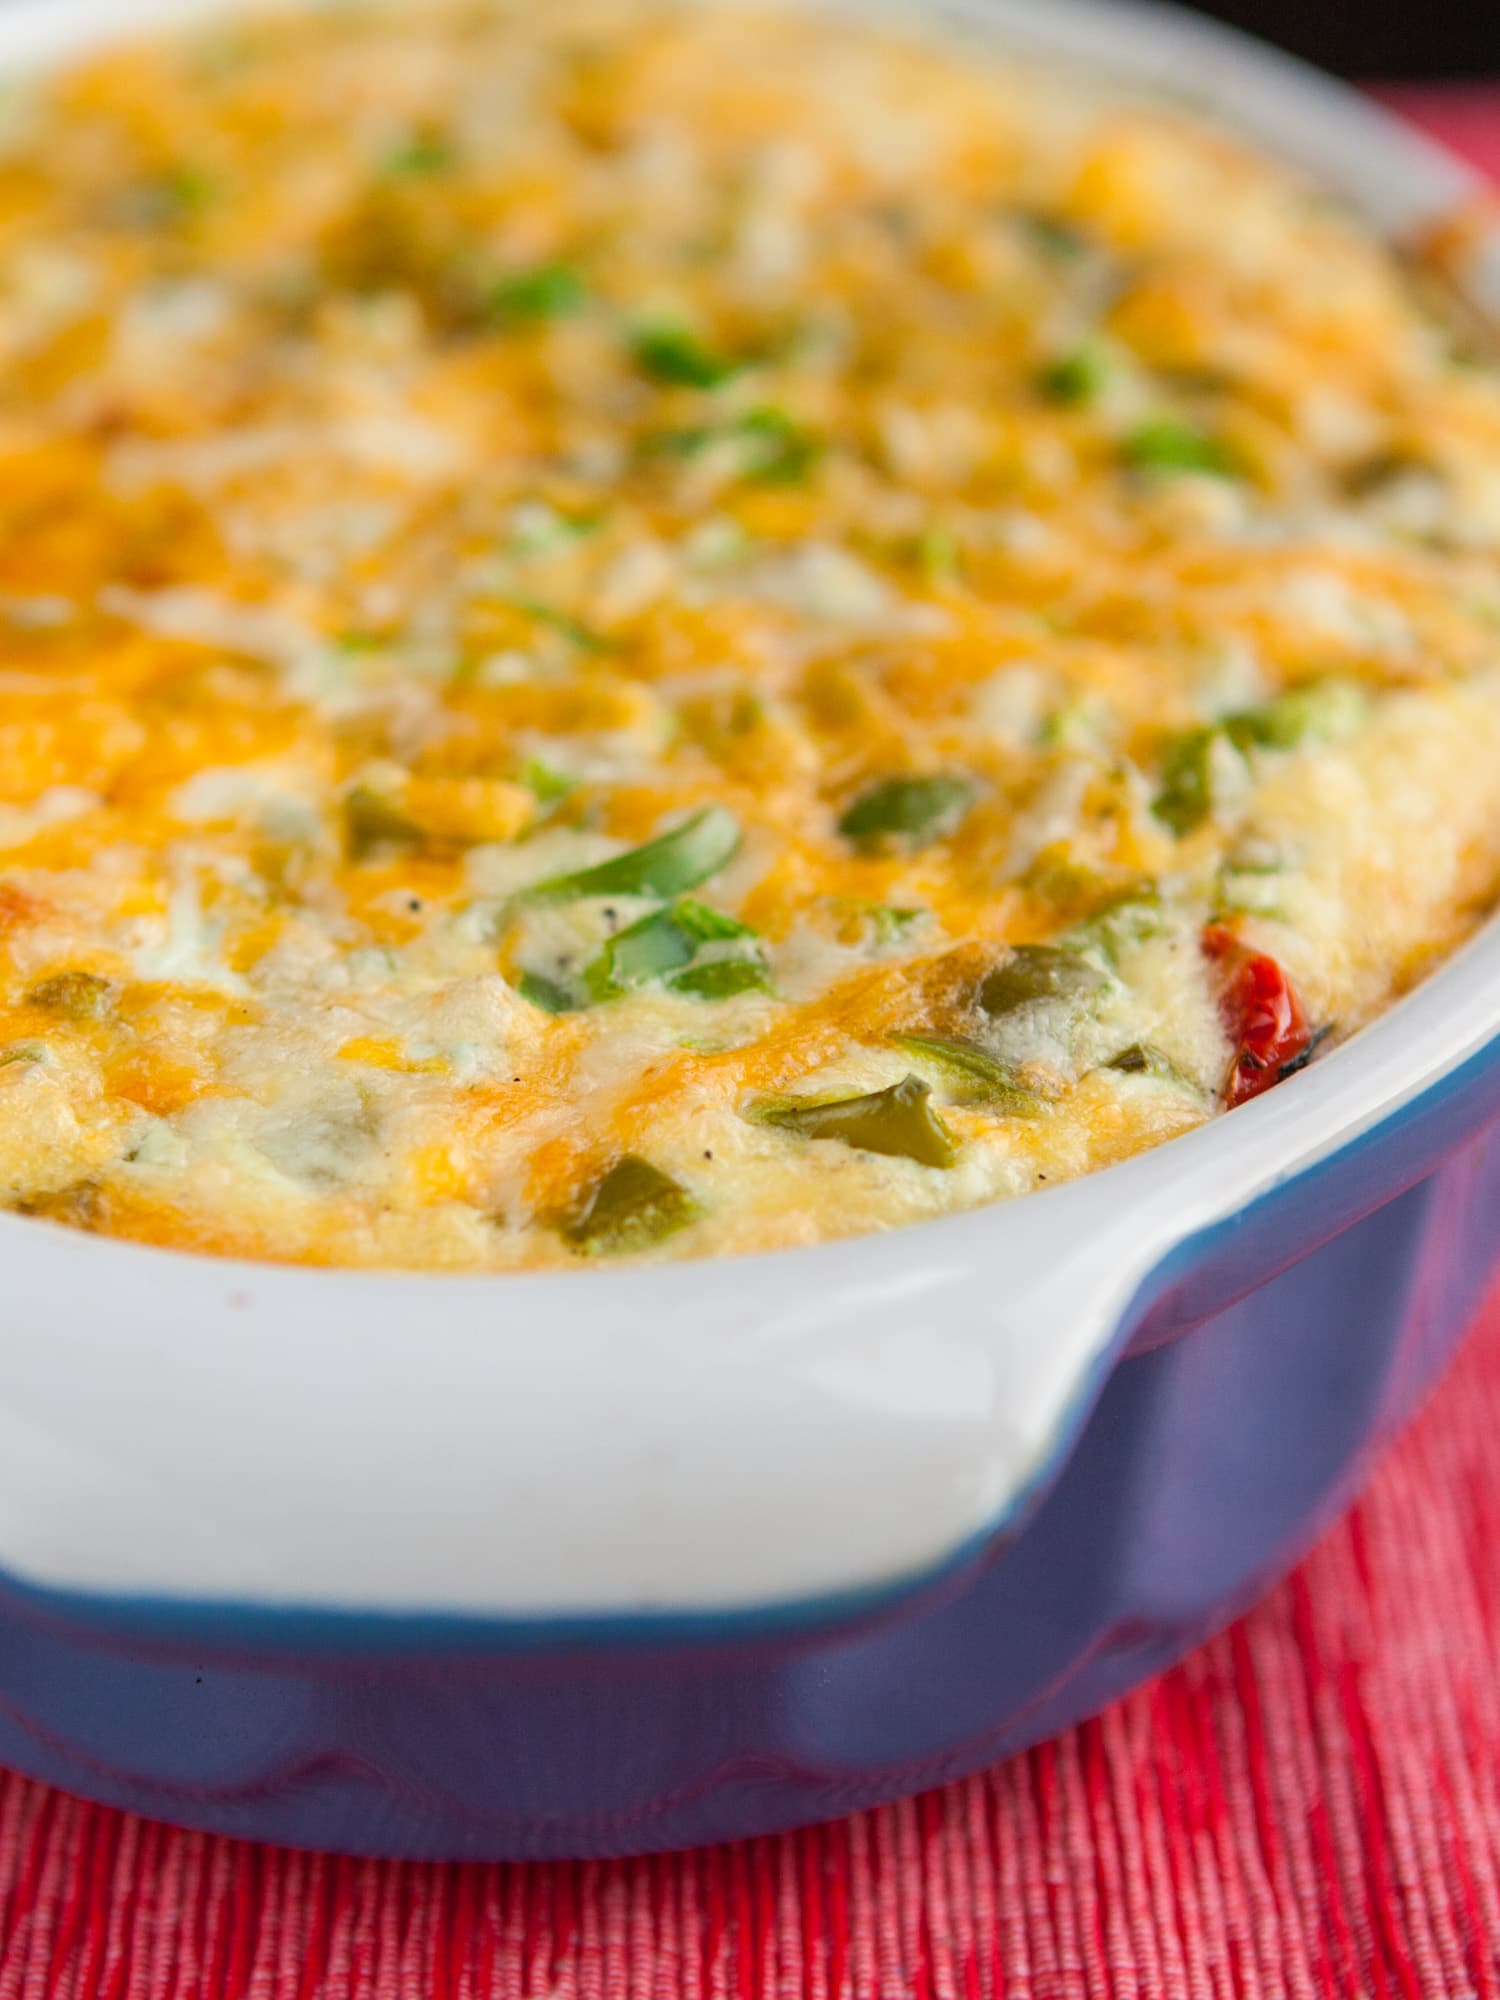 baked cheesy green pepper casserole in blue baking dish on table.